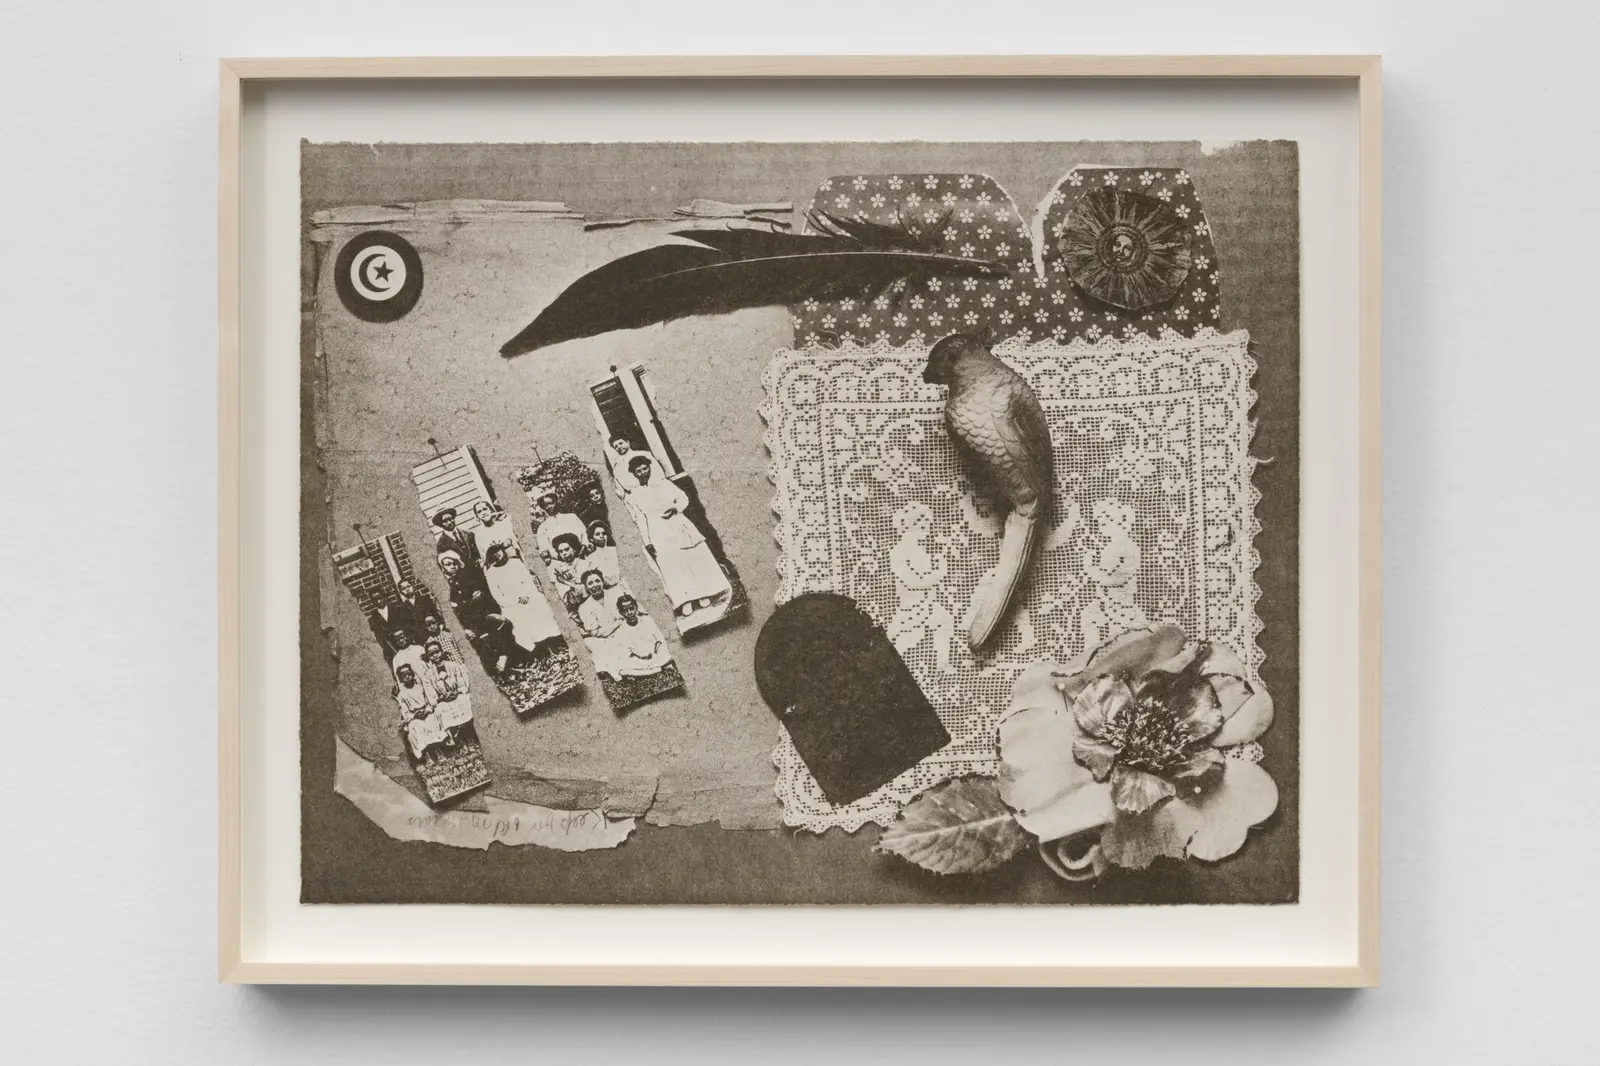 Color lithograph from an aluminum plate depicting an arrangement of several items including torn images of Black women, a bird, a feather, a flower, a paper sun and a lace doily. Handwriting on the bottom reads: Keep for Old Memiors.